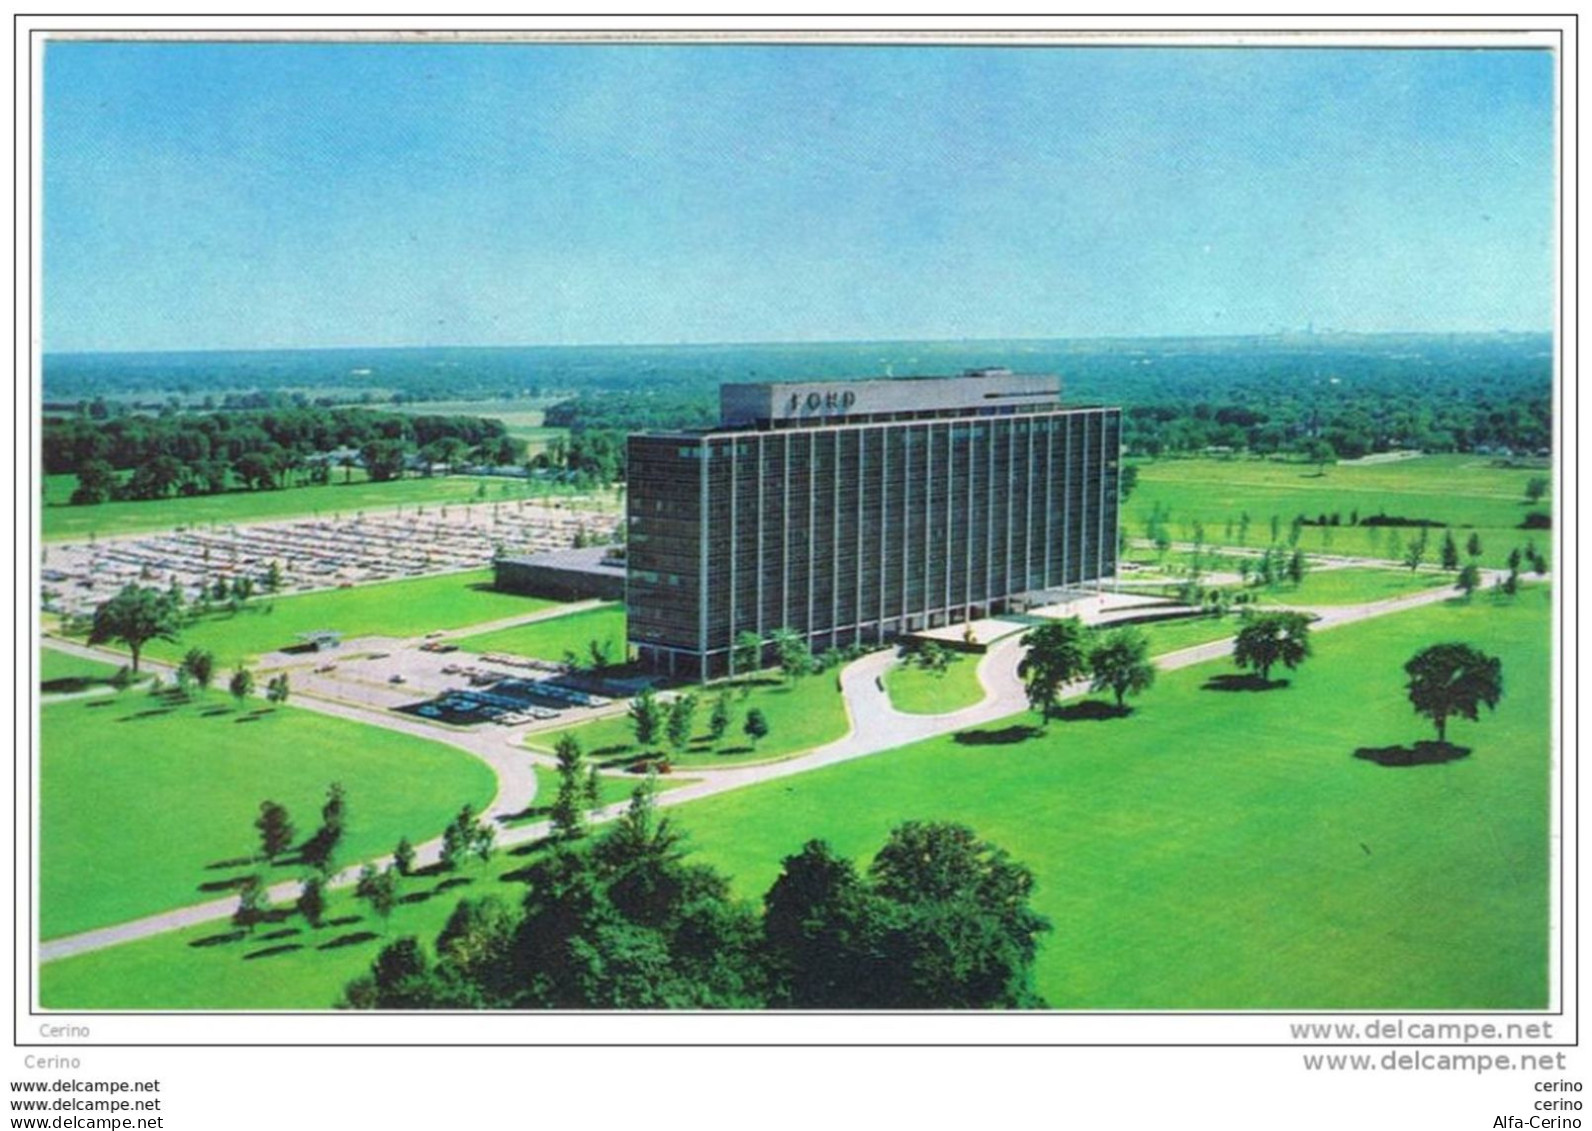 DEARBORN:  FORD  MOTOR  COMPANY  -  CENTRAL  OFFICE  BUILDING  -  FP - Dearborn